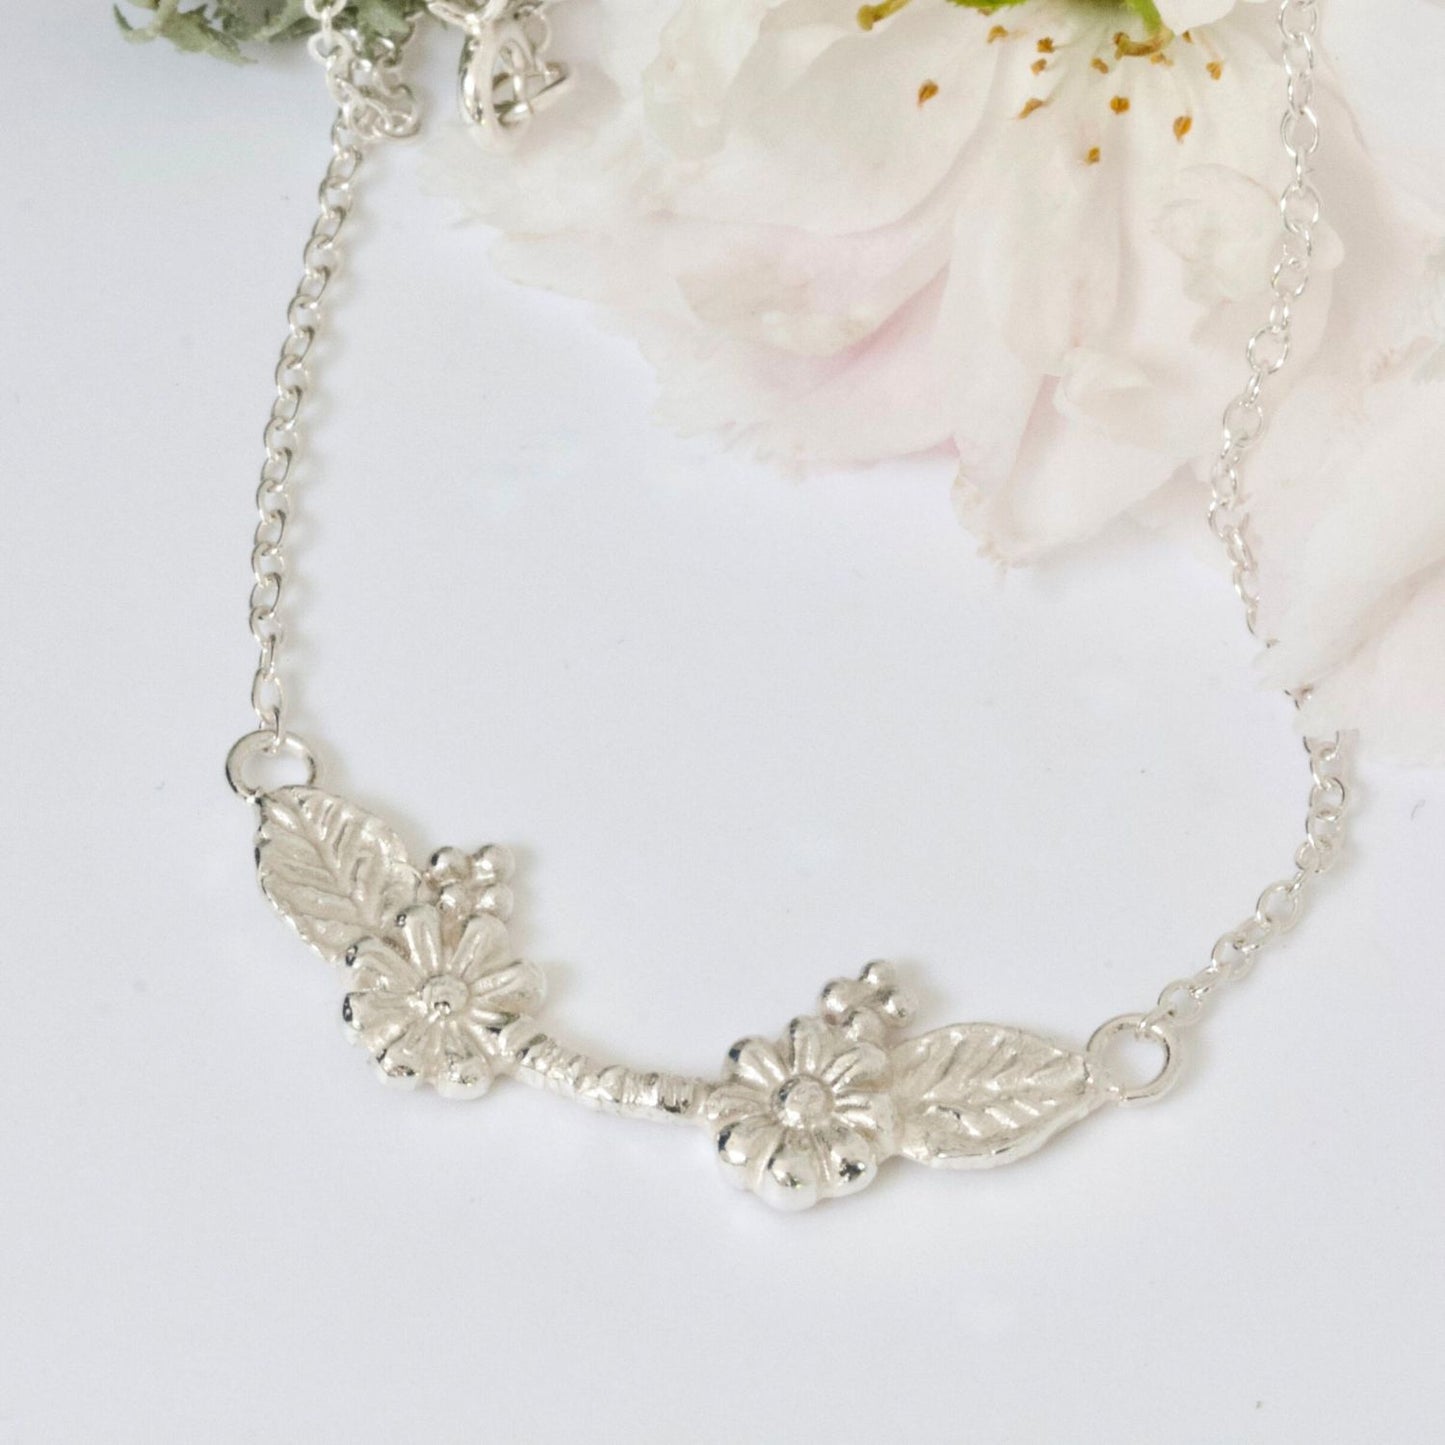 wildflower silver daisy necklace